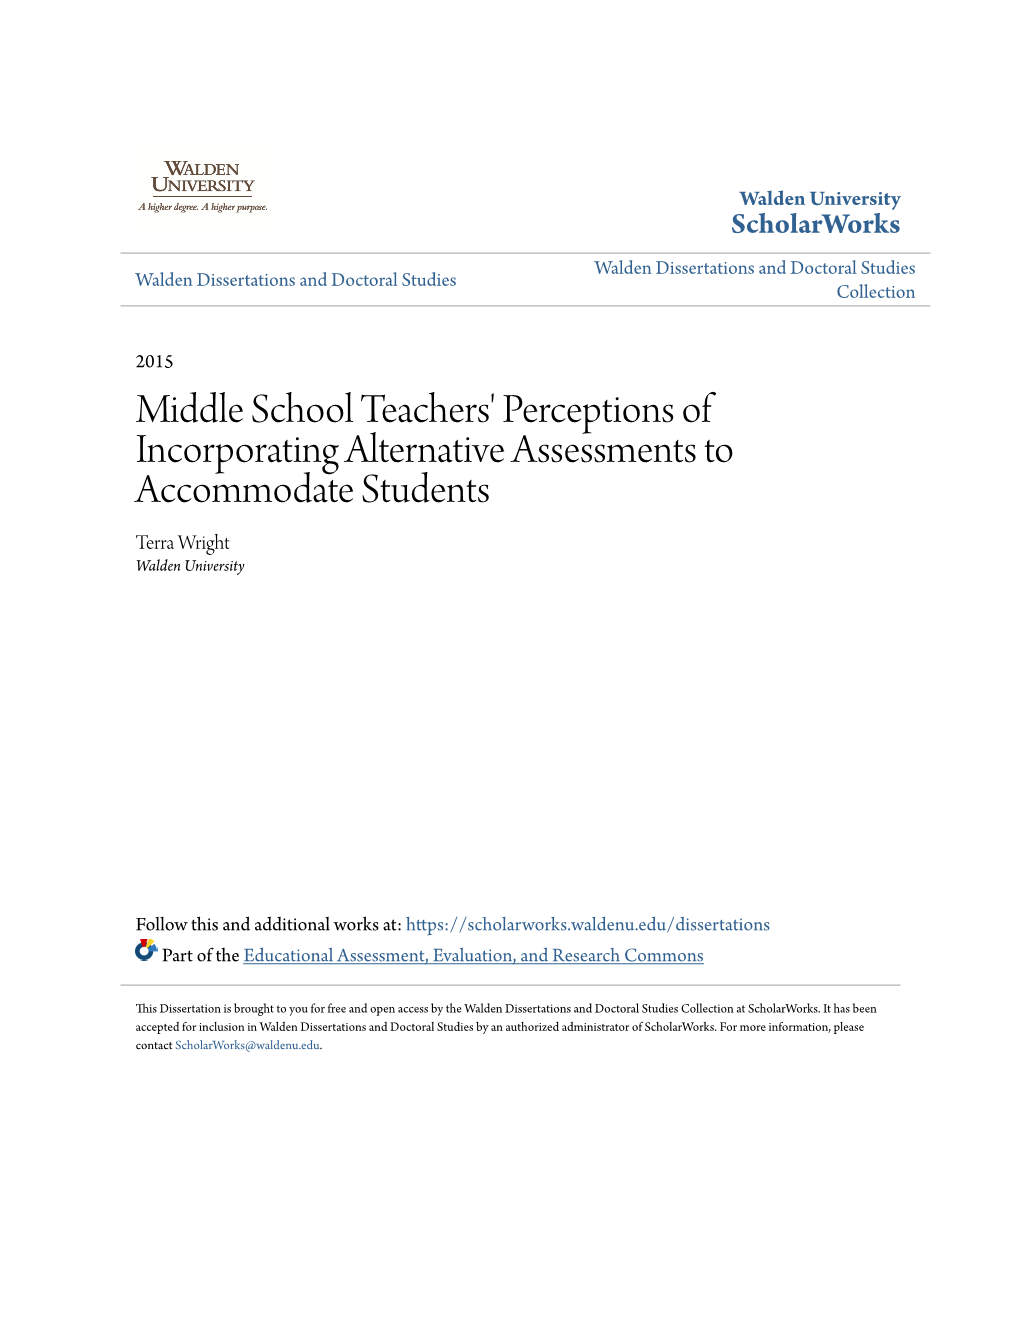 Middle School Teachers' Perceptions of Incorporating Alternative Assessments to Accommodate Students Terra Wright Walden University